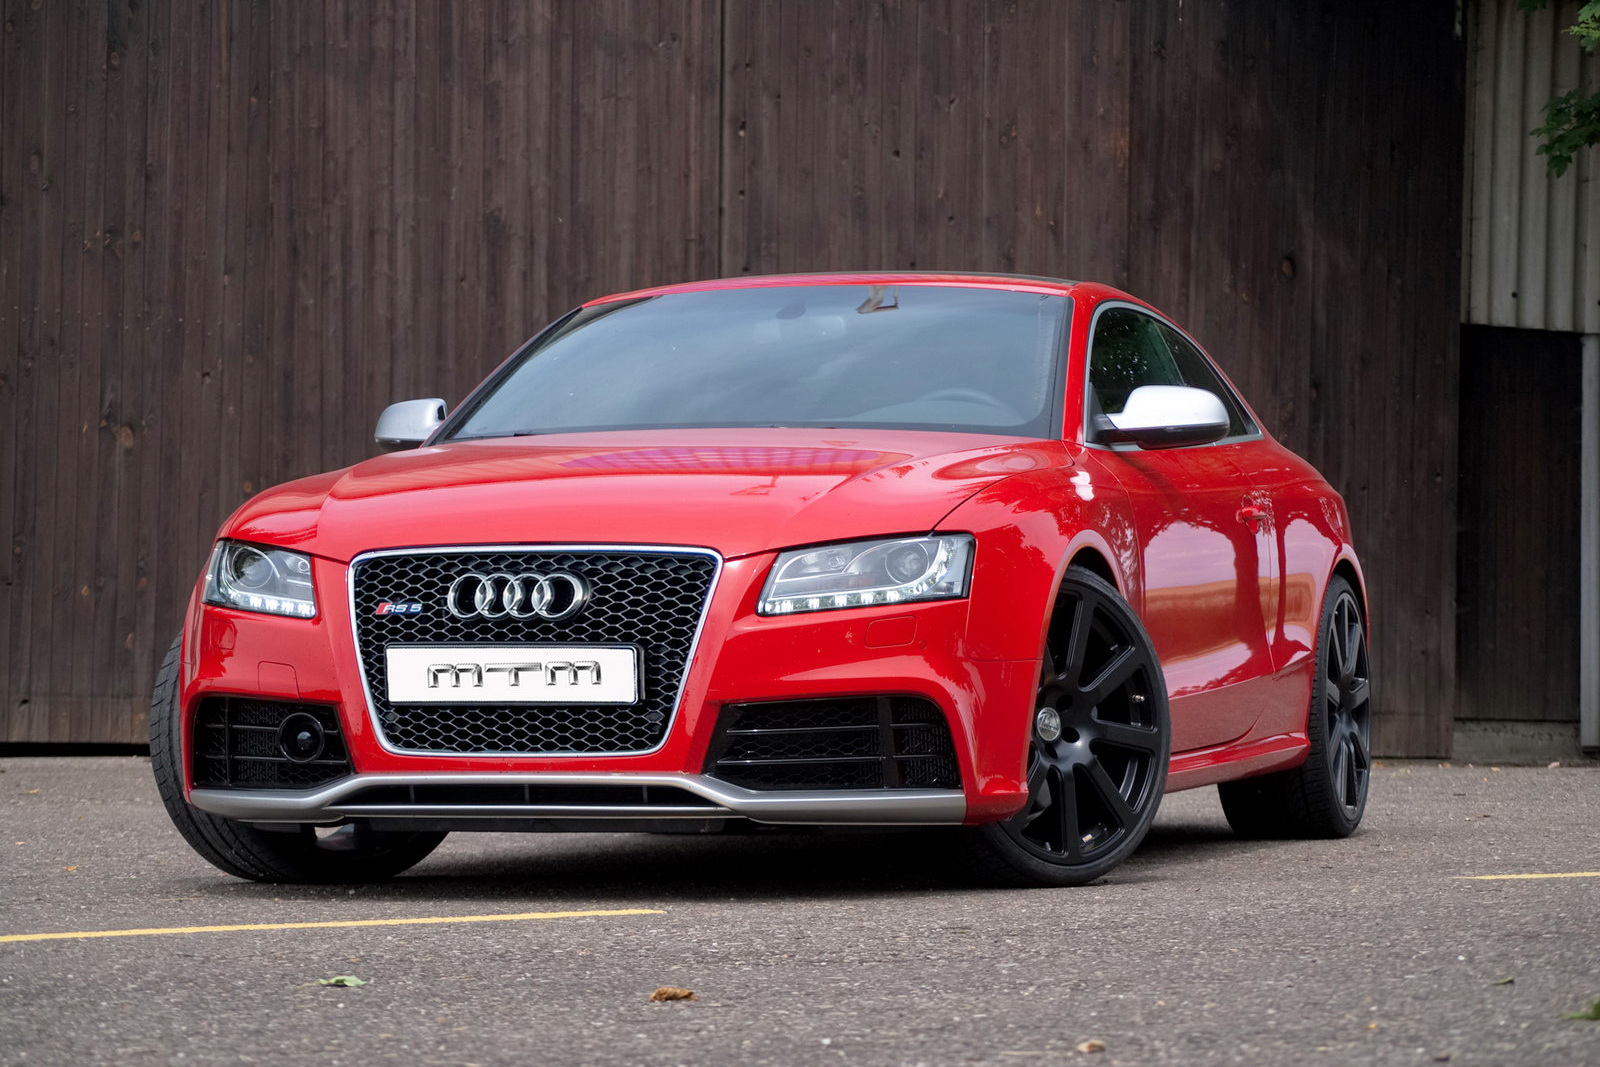 MTM Massages the Audi RS5, Top Speed Increased to (188mph) | Carscoops